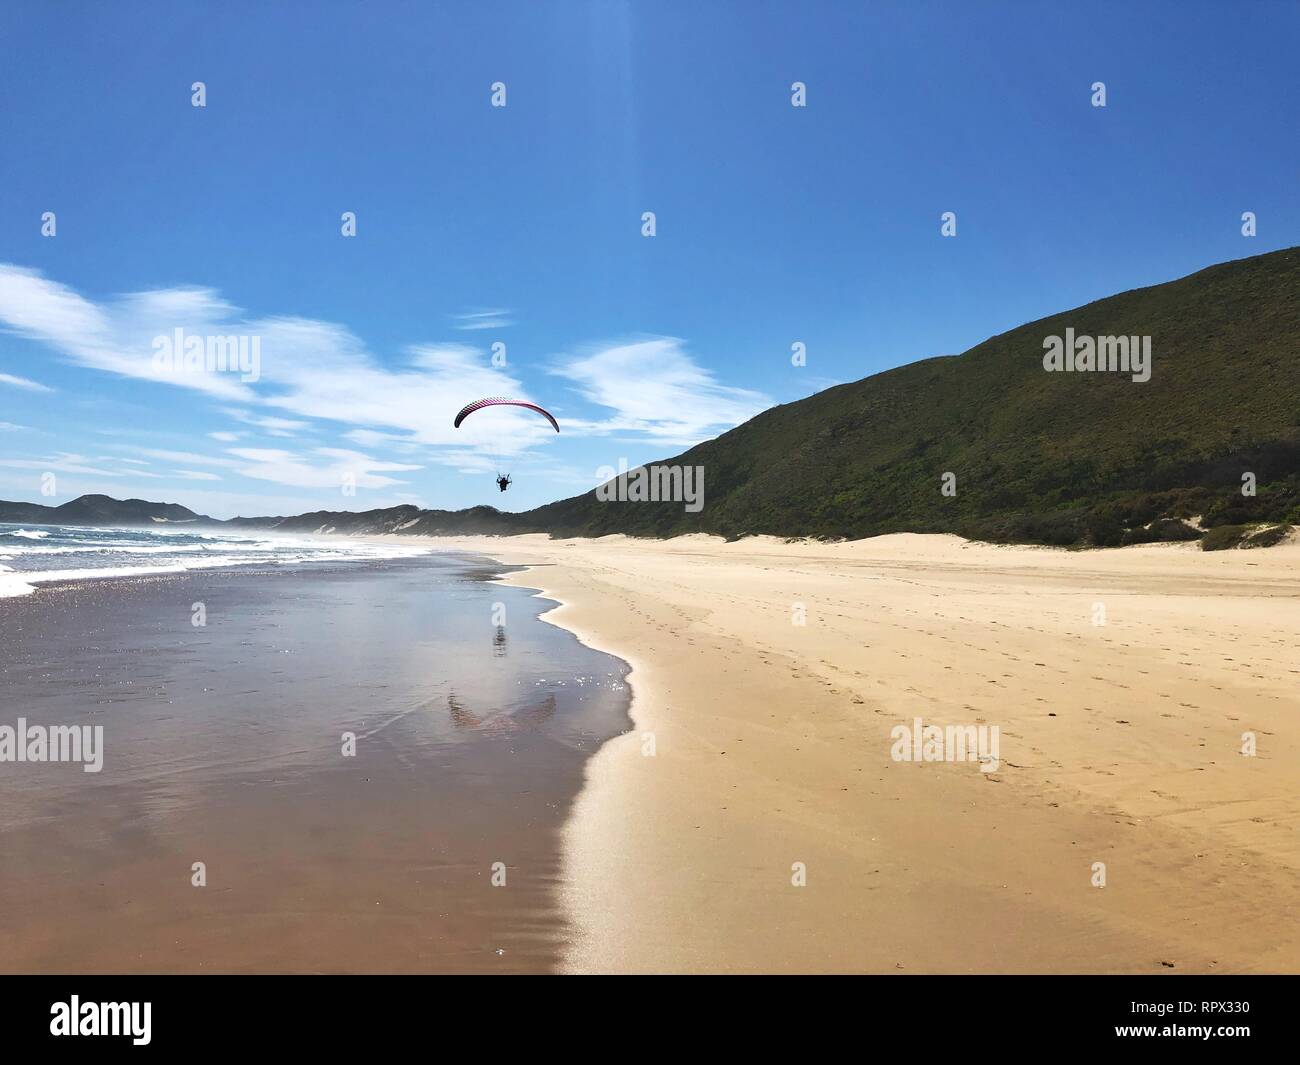 Paraglider on beach, Brenton on Sea, Western Cape, South Africa Stock Photo